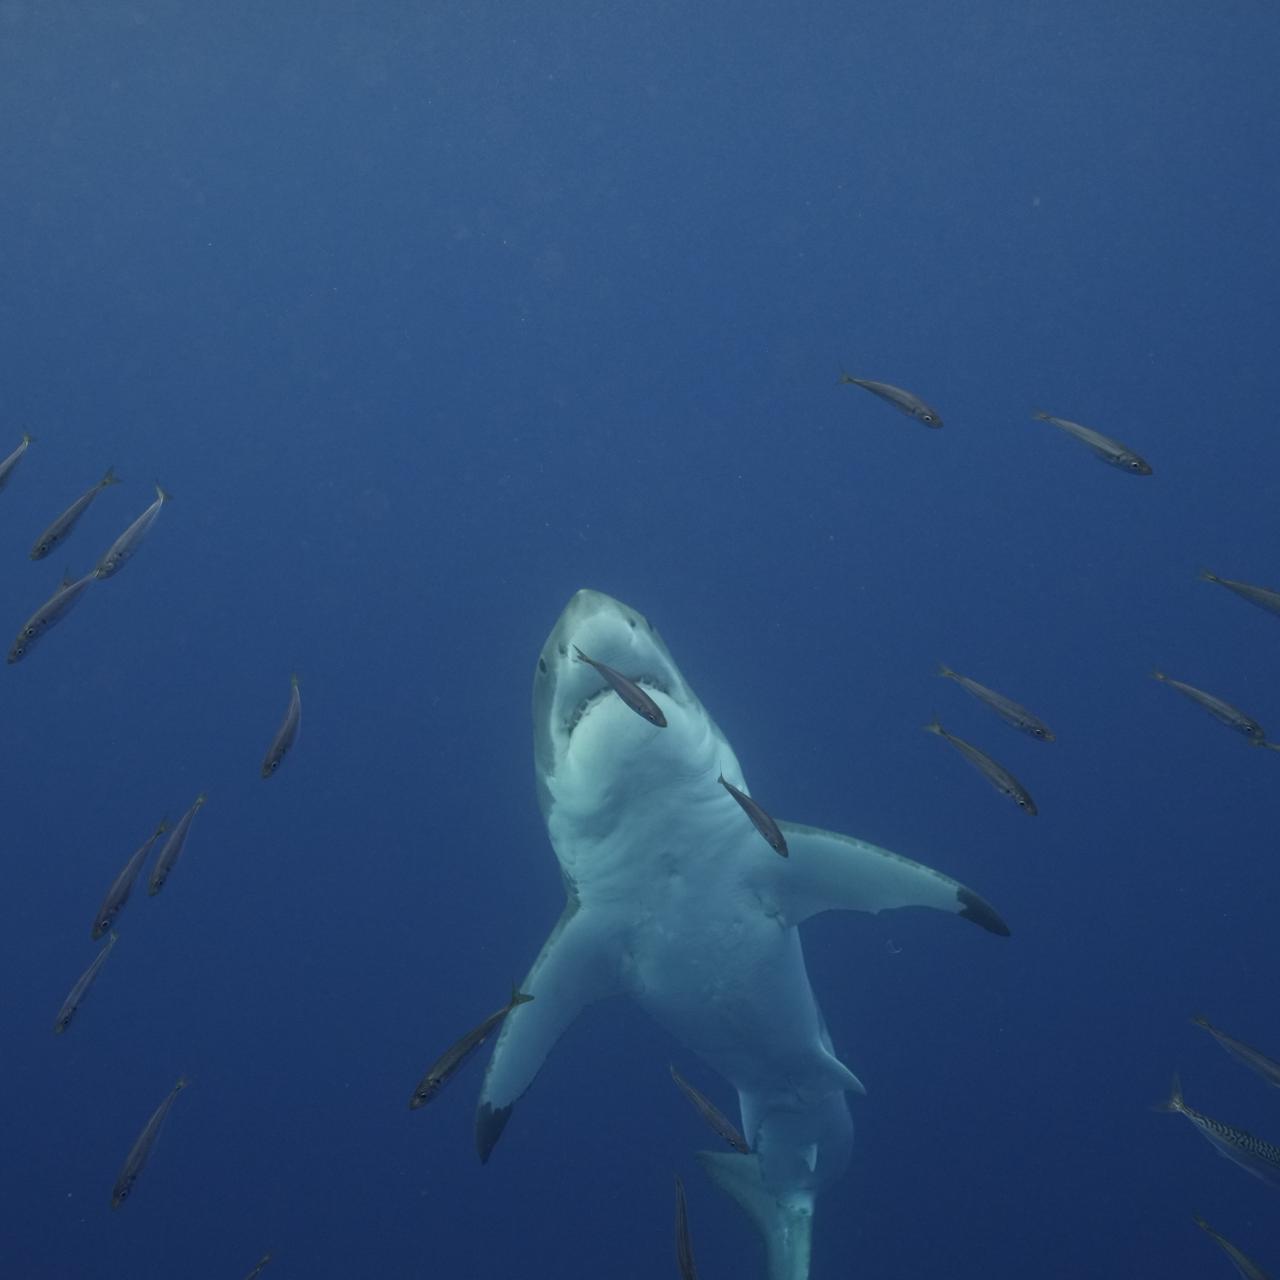 This could be the first newborn great white shark ever captured on camera